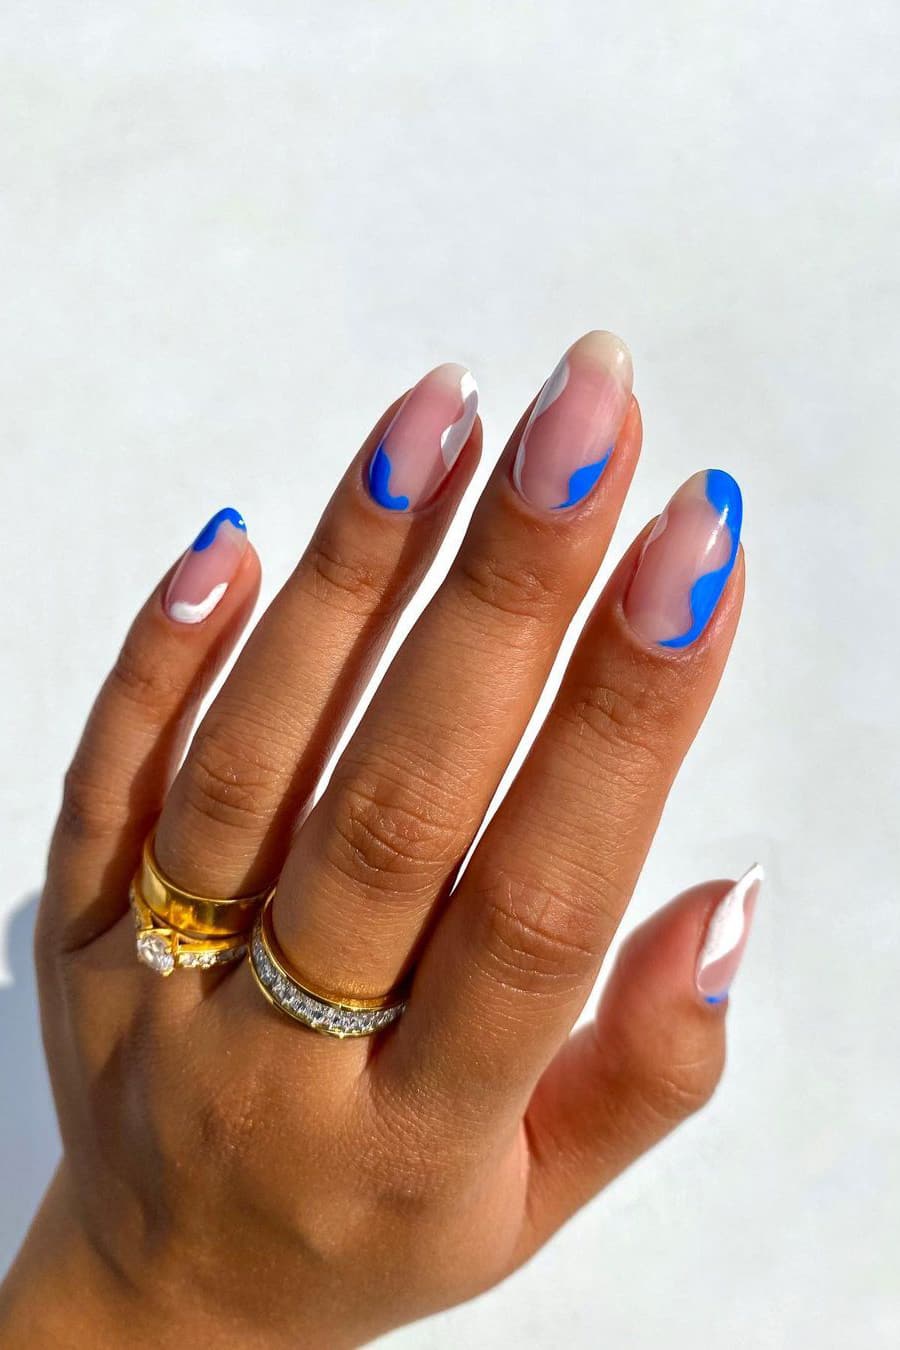 Bright blue and white combination nails